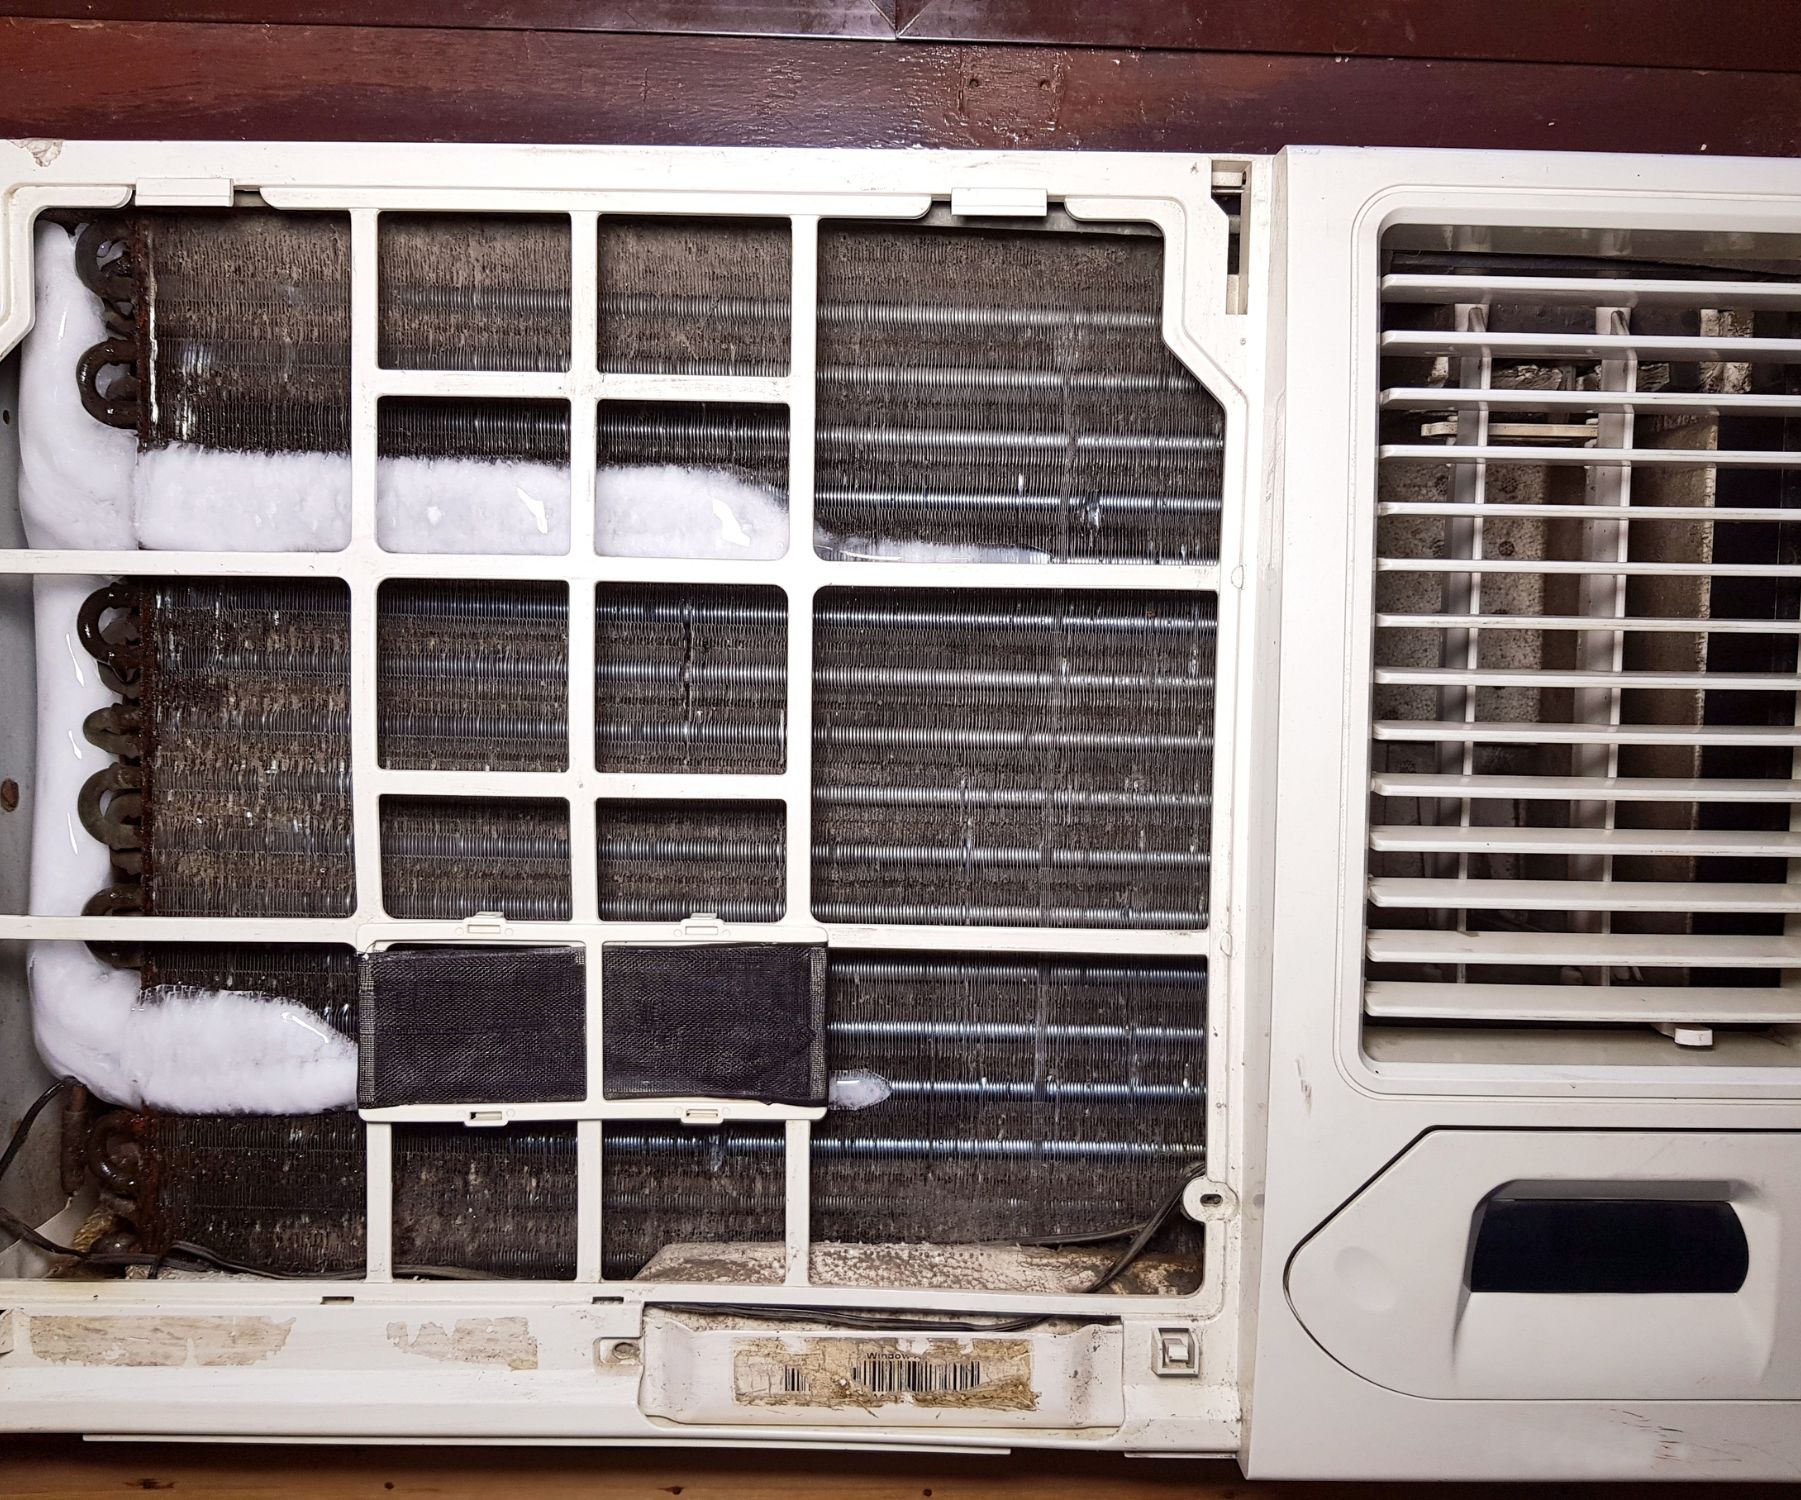 What Happens If You Don't Vent a Window Air Conditioner?